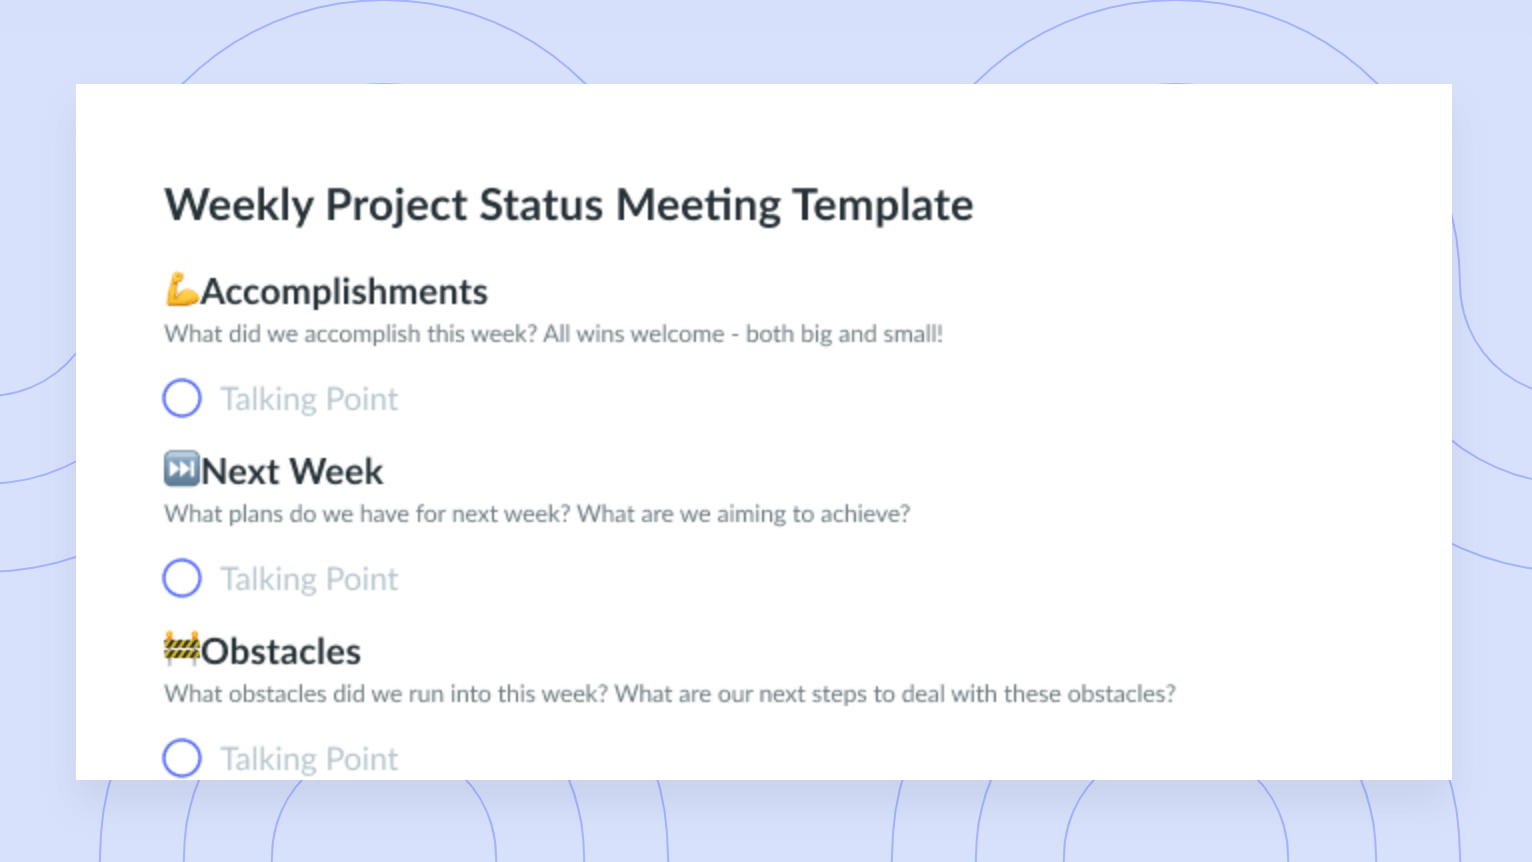 Weekly Project Status Meeting Template